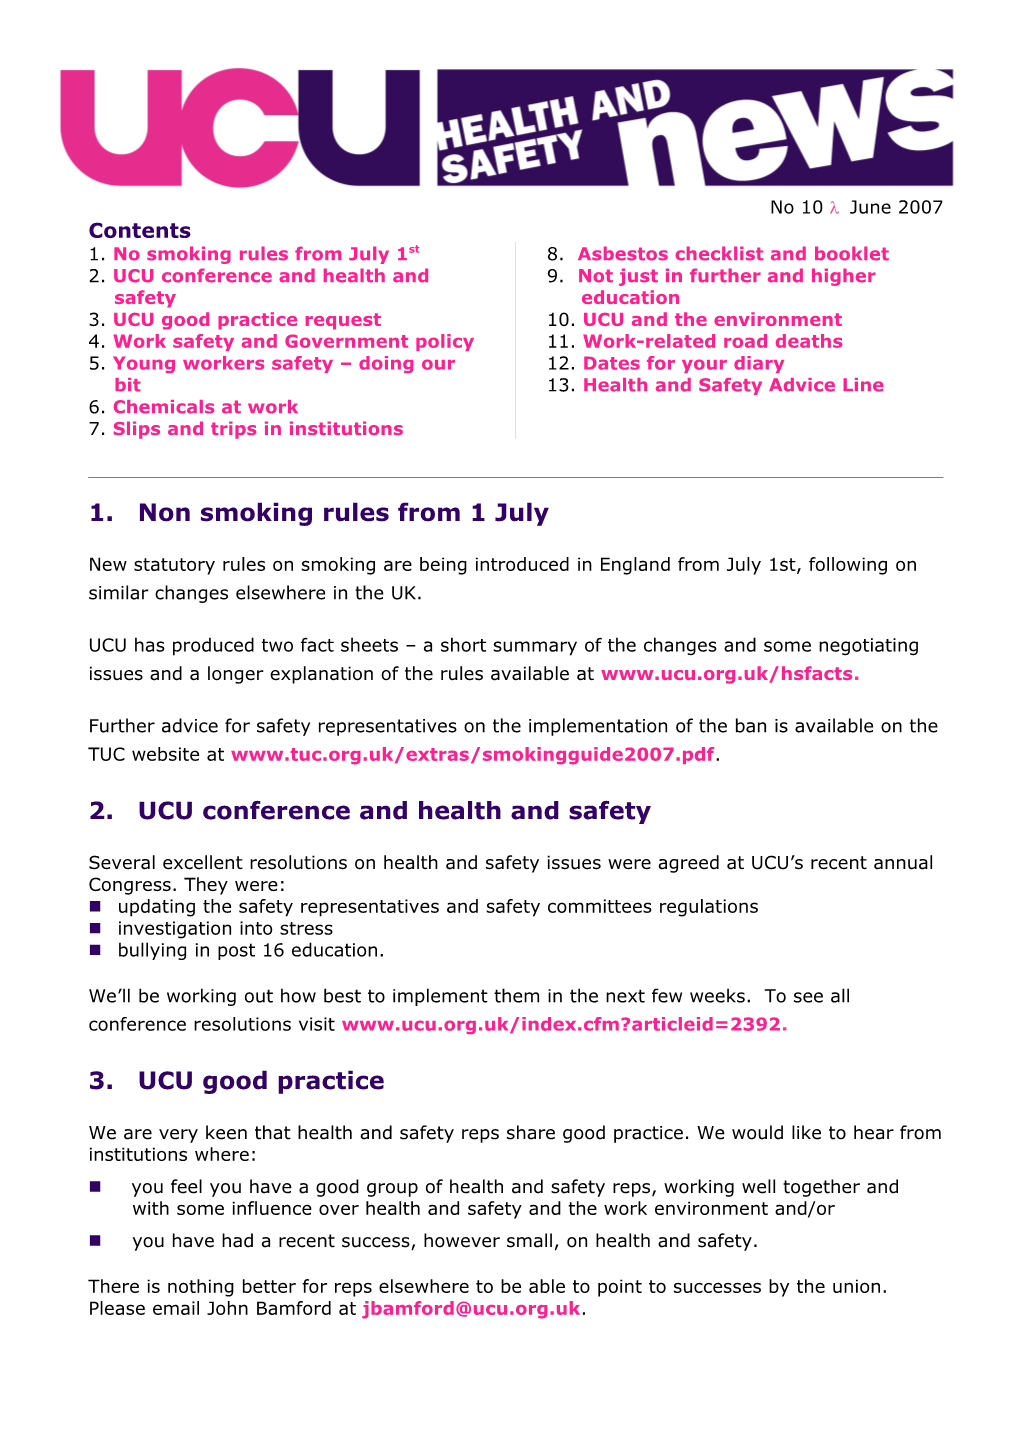 2. UCU Conference and Health and Safety